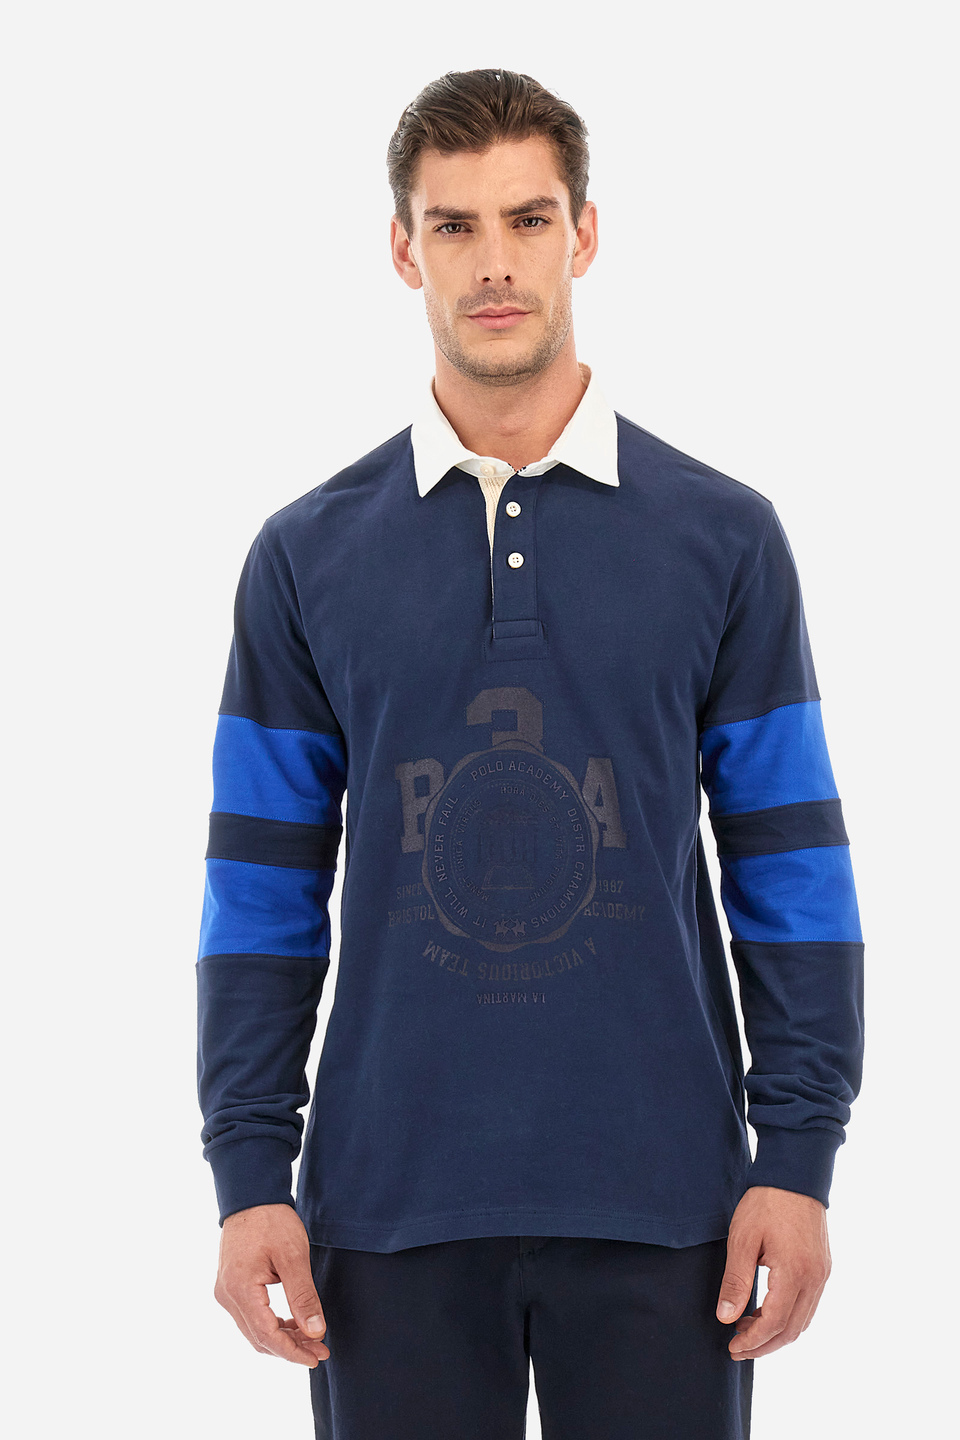 Polo uomo comfort fit - Welby | La Martina - Official Online Shop